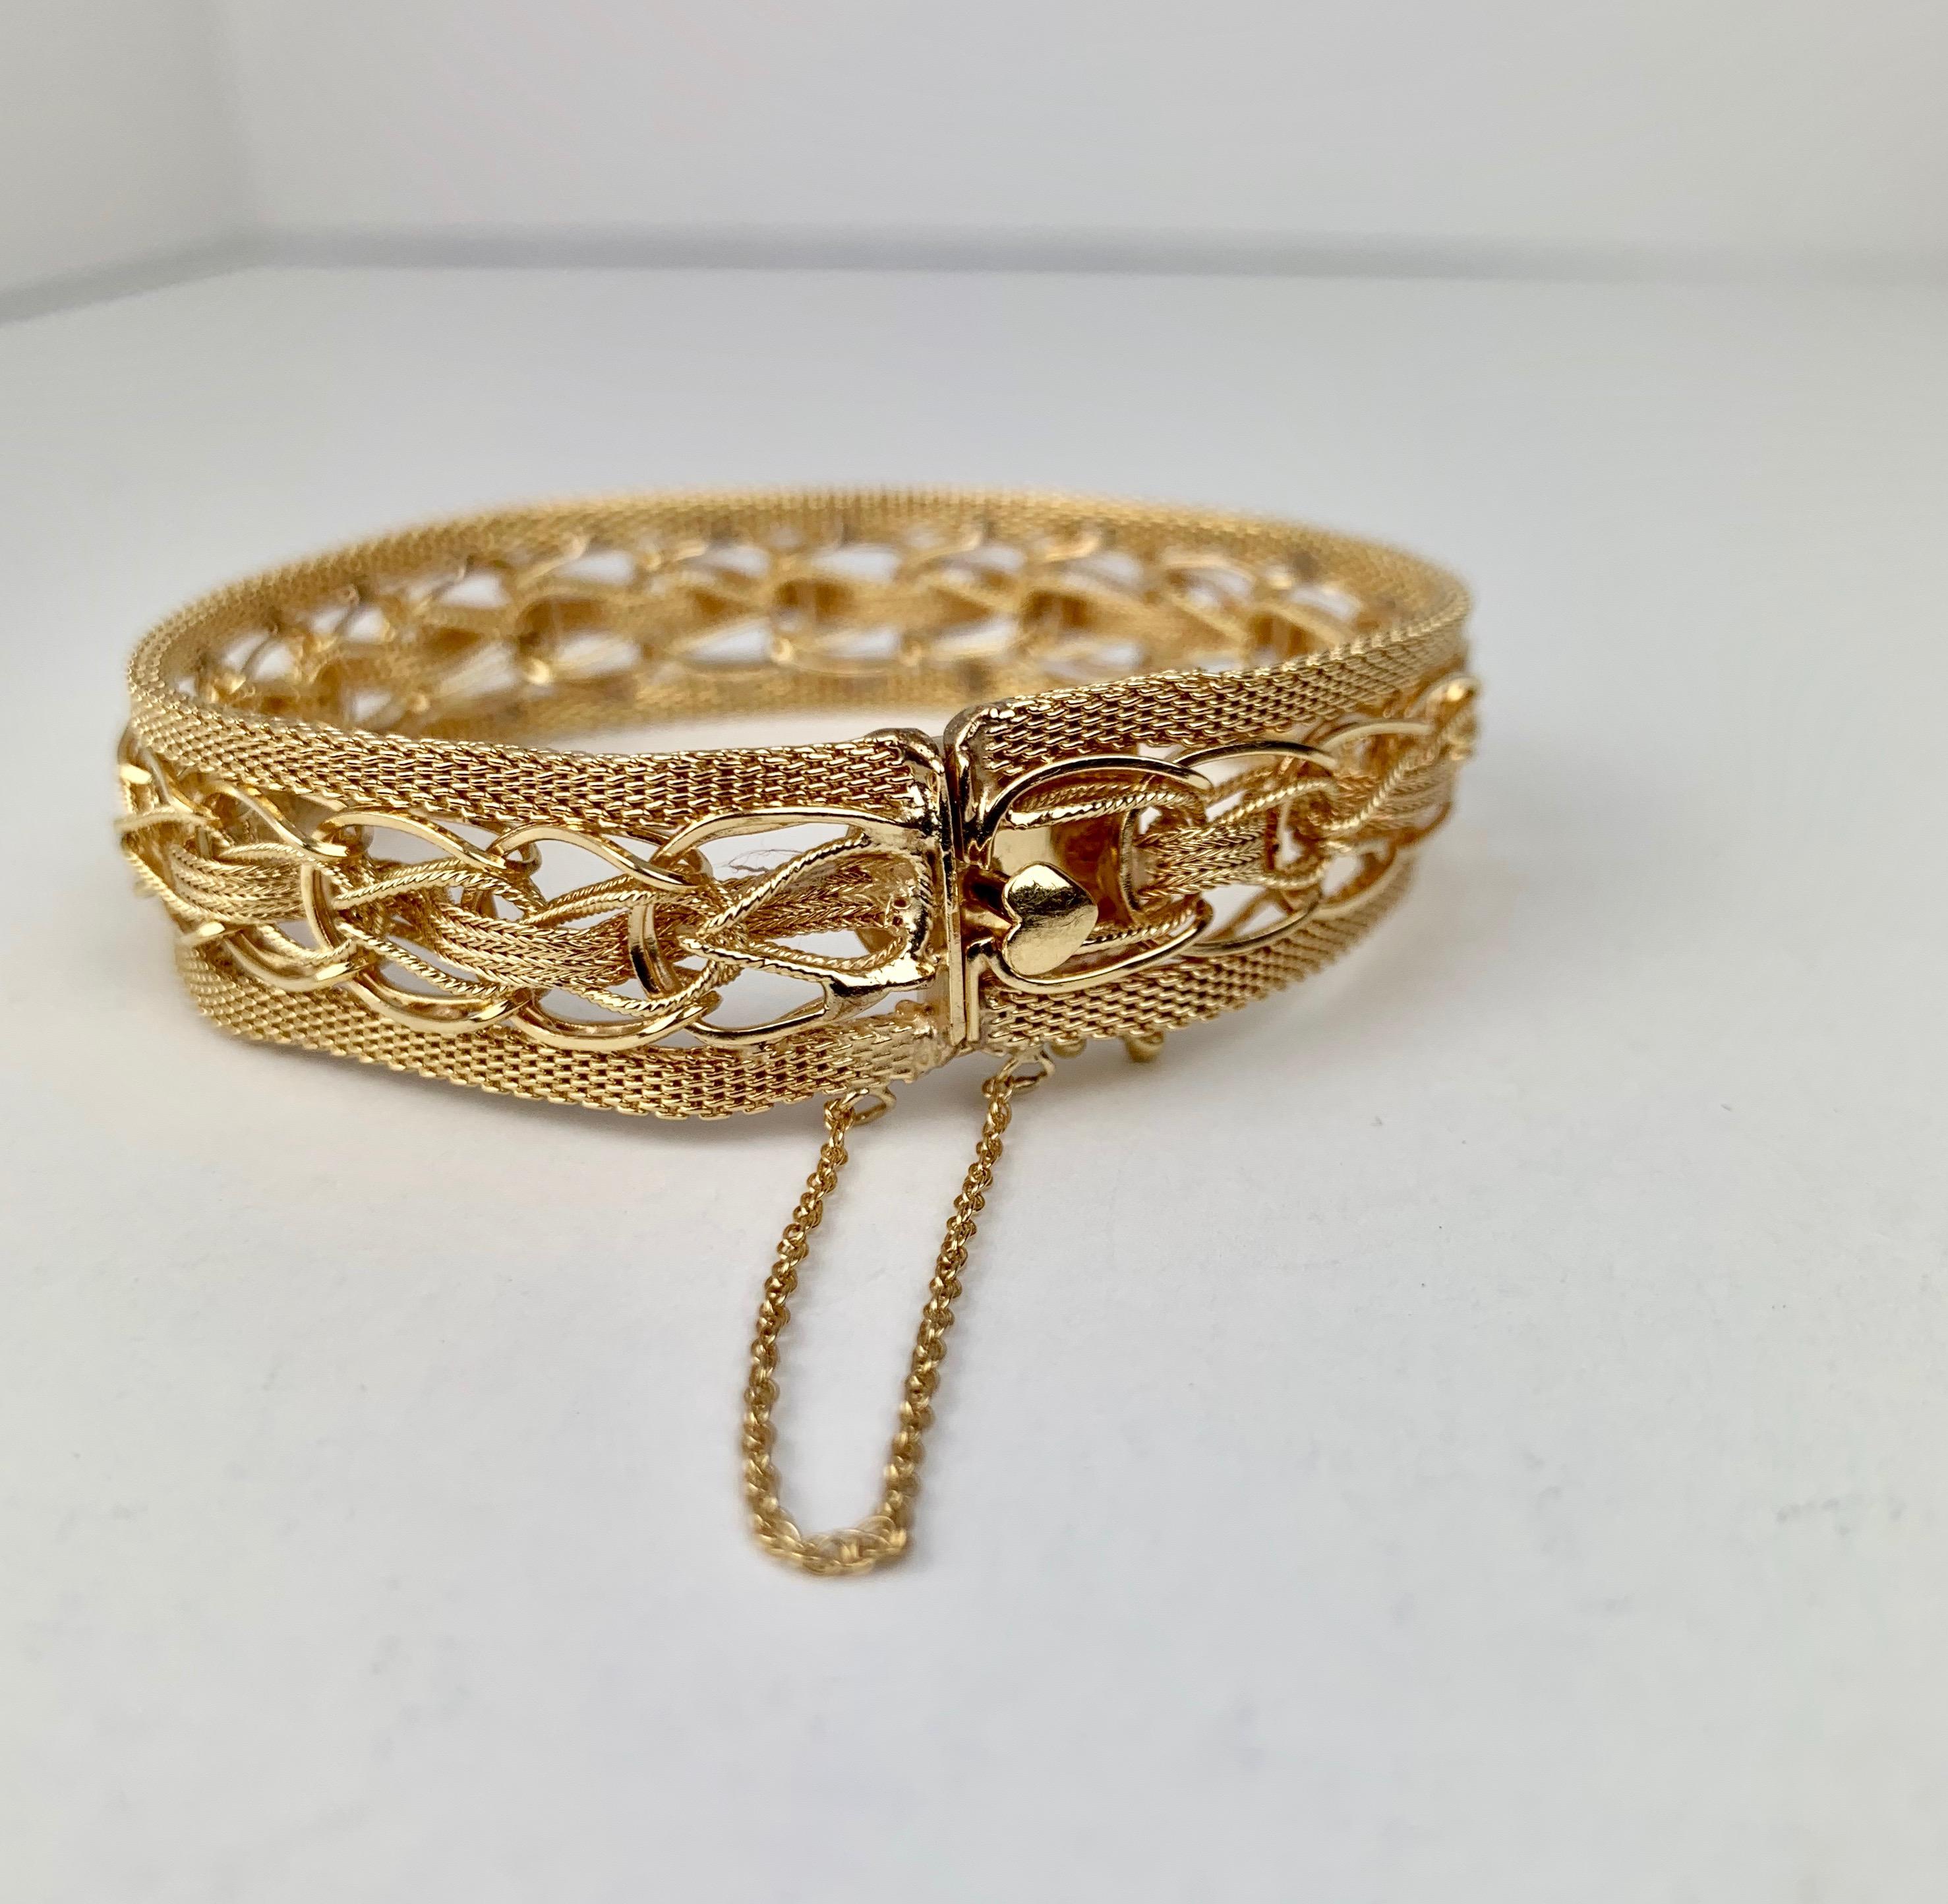 Contemporary Gold Mesh Bracelet with a Heart Shaped Thumb Latch-14 karat y.g.  For Sale